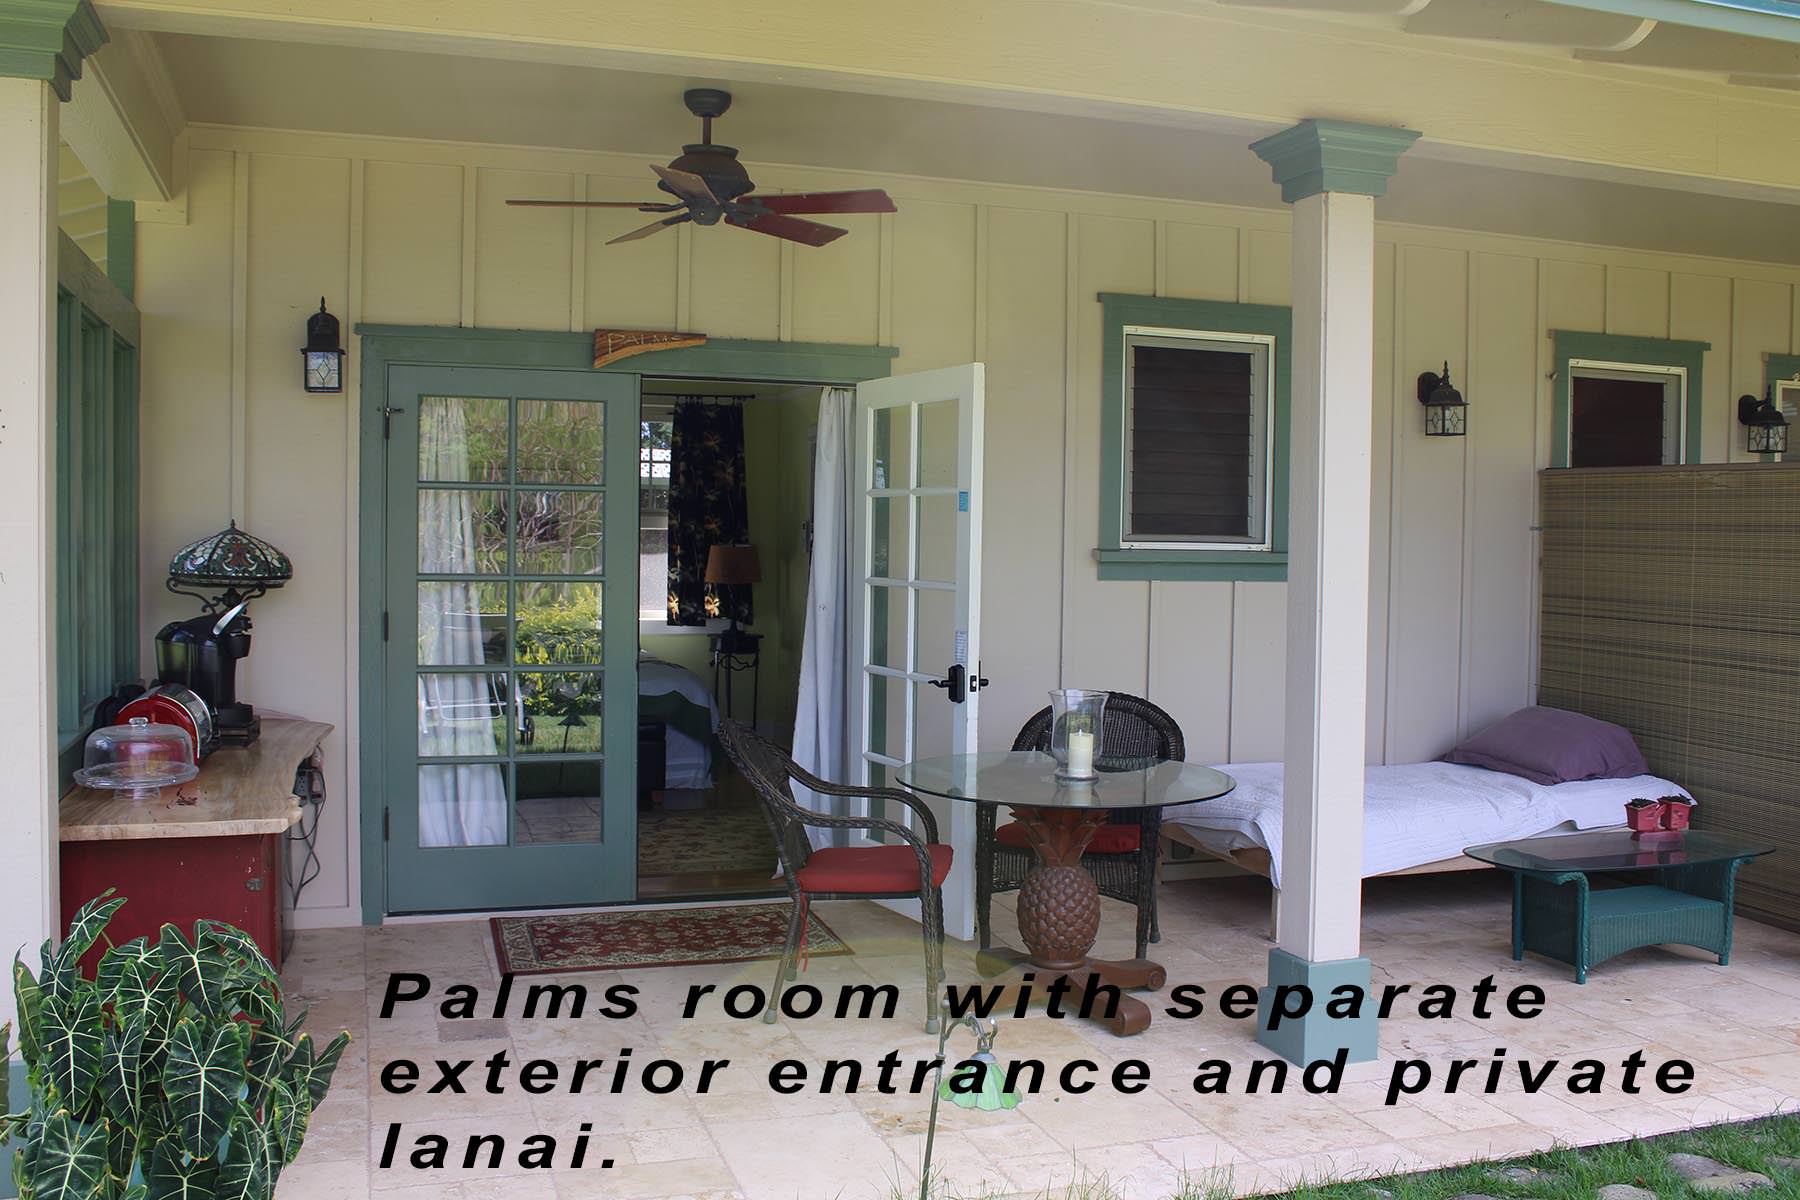 Palm room separate entrance and private lanai